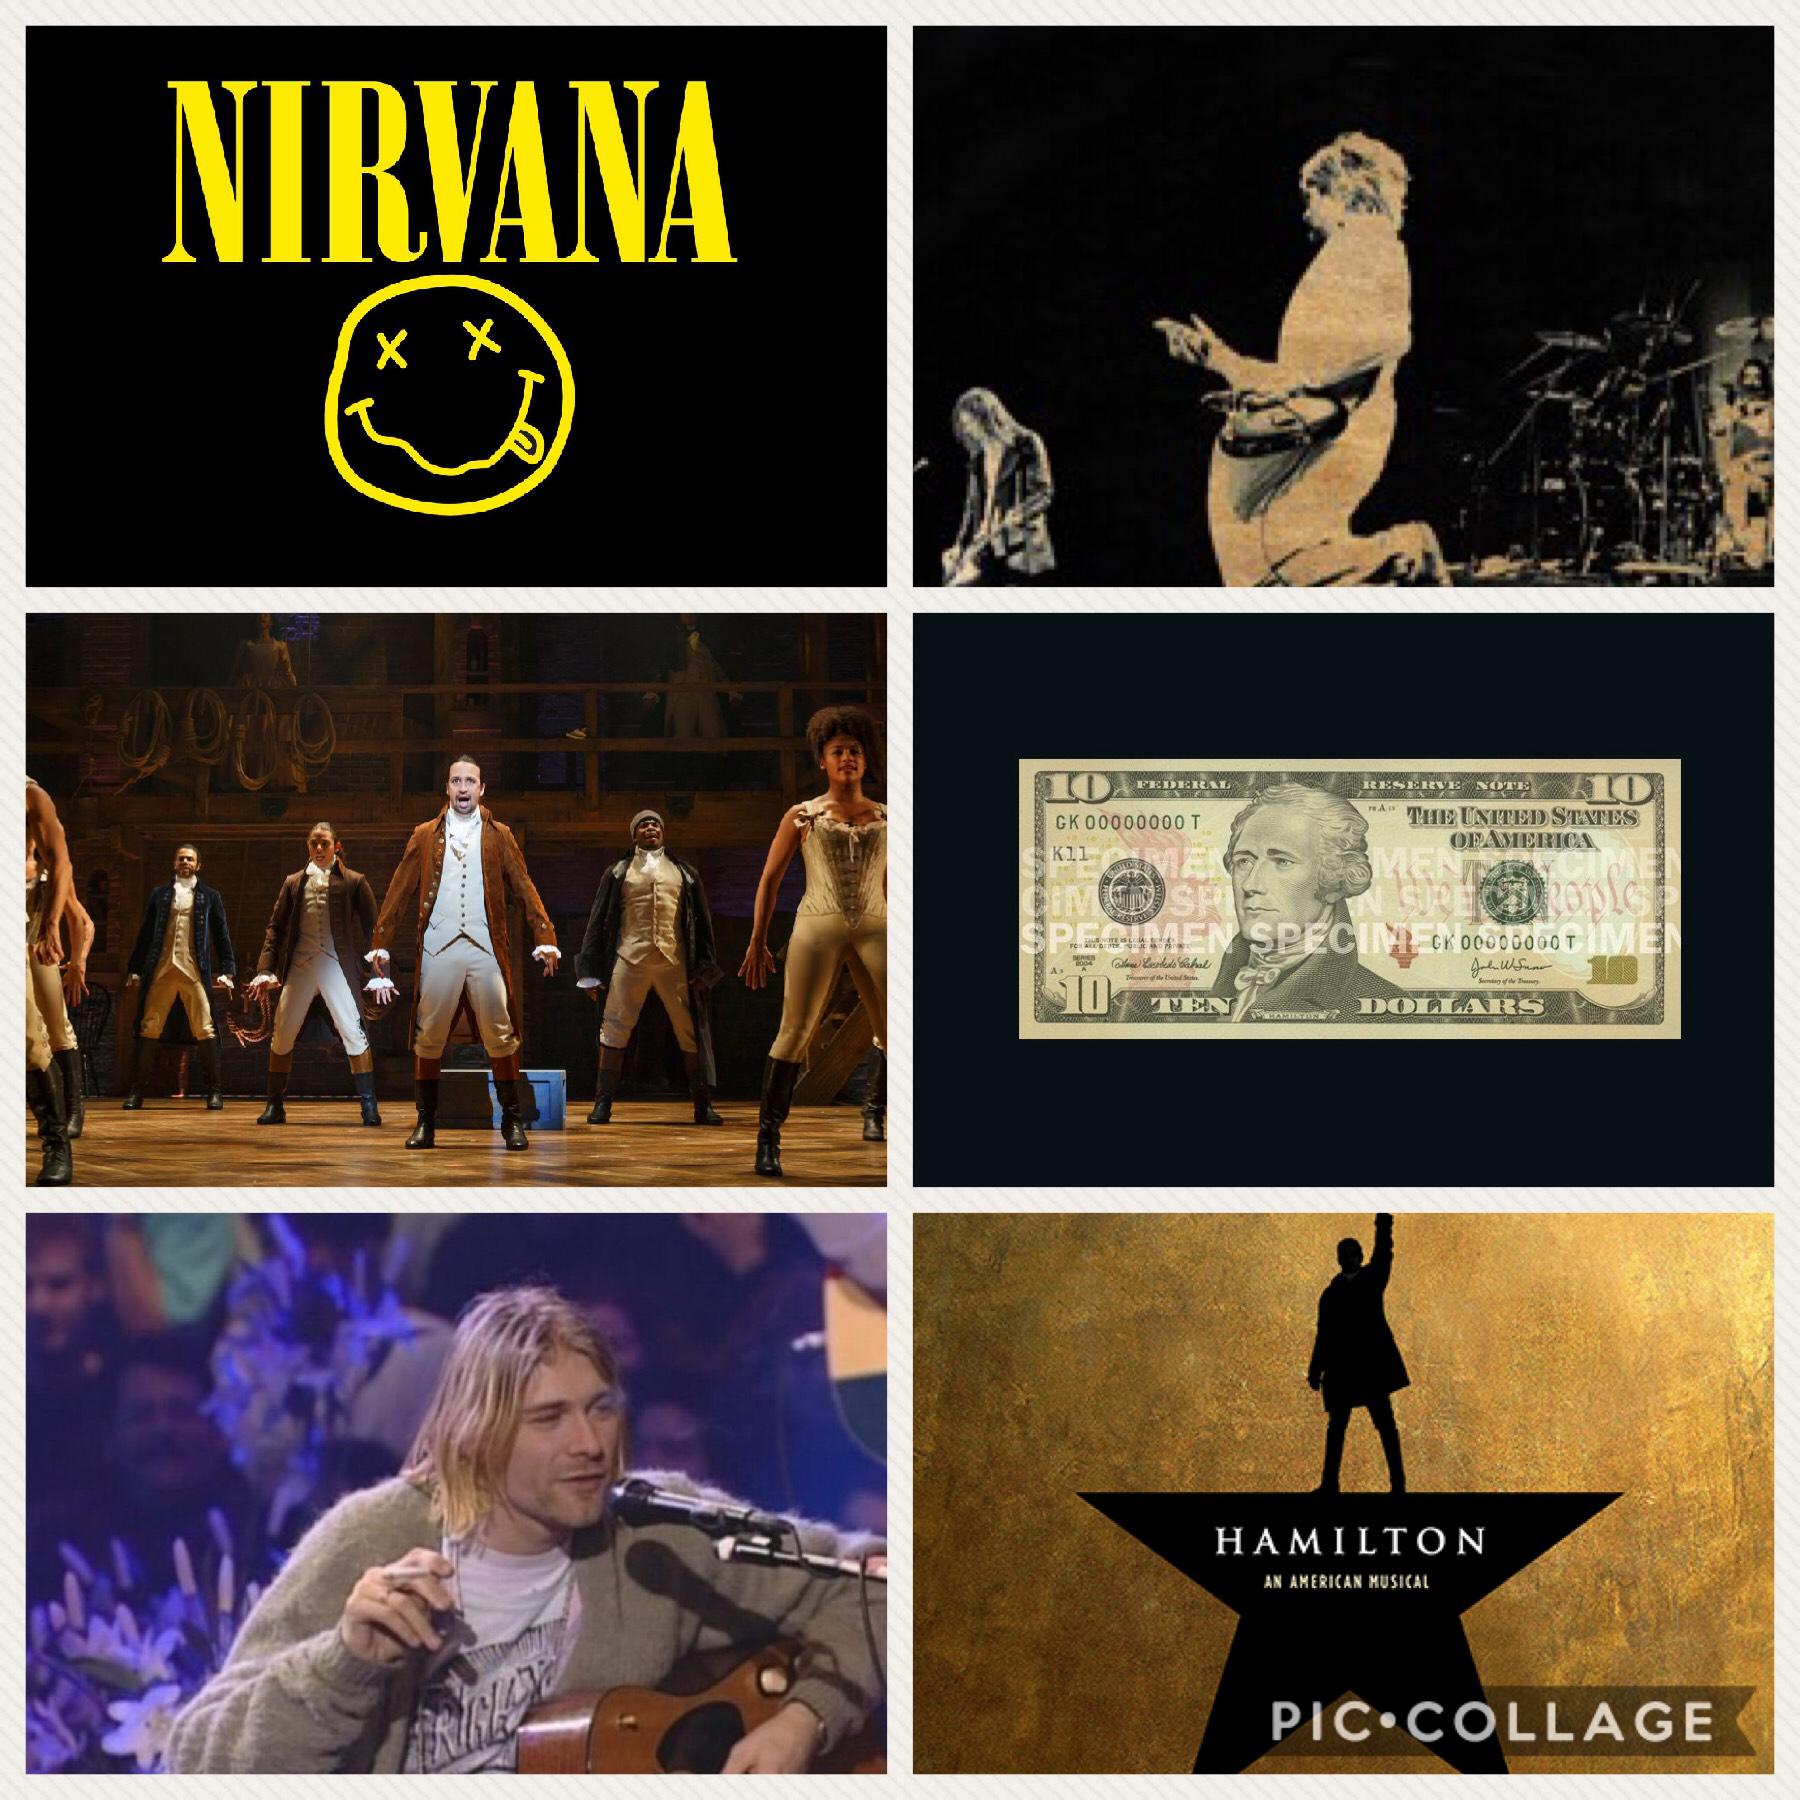 All the things GiaL13 are obsessed with (includes the picture of the cast of Hamilton, the picture of nirvana unplugged, the Nirvana logo, the Hamilton logo, the $10 bill, and Nirvana’s Live at reading pictures)